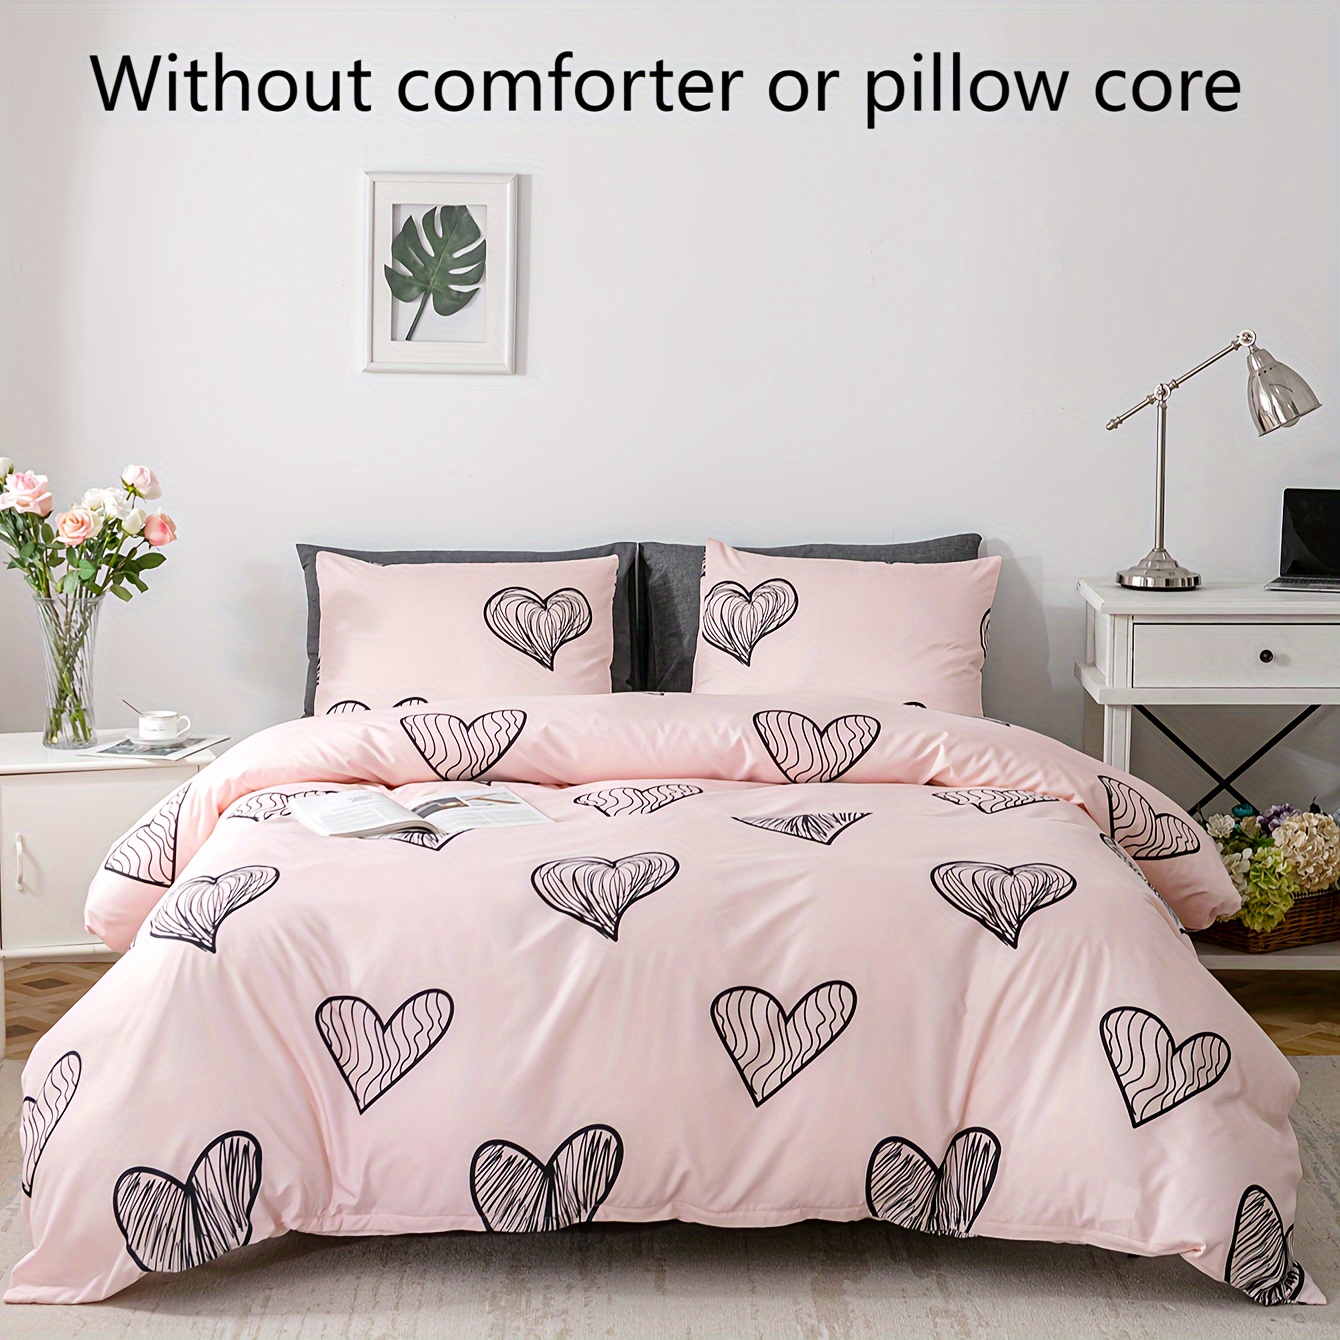 

3pcs Duvet Cover Set Love Journey Ultra Soft Comfortable Polyester Floral Style Duvet Cover With 2 Pillowcases, Breathable Bedding For Bedroom & Guest Room (without Comforter Or Pillow Core)